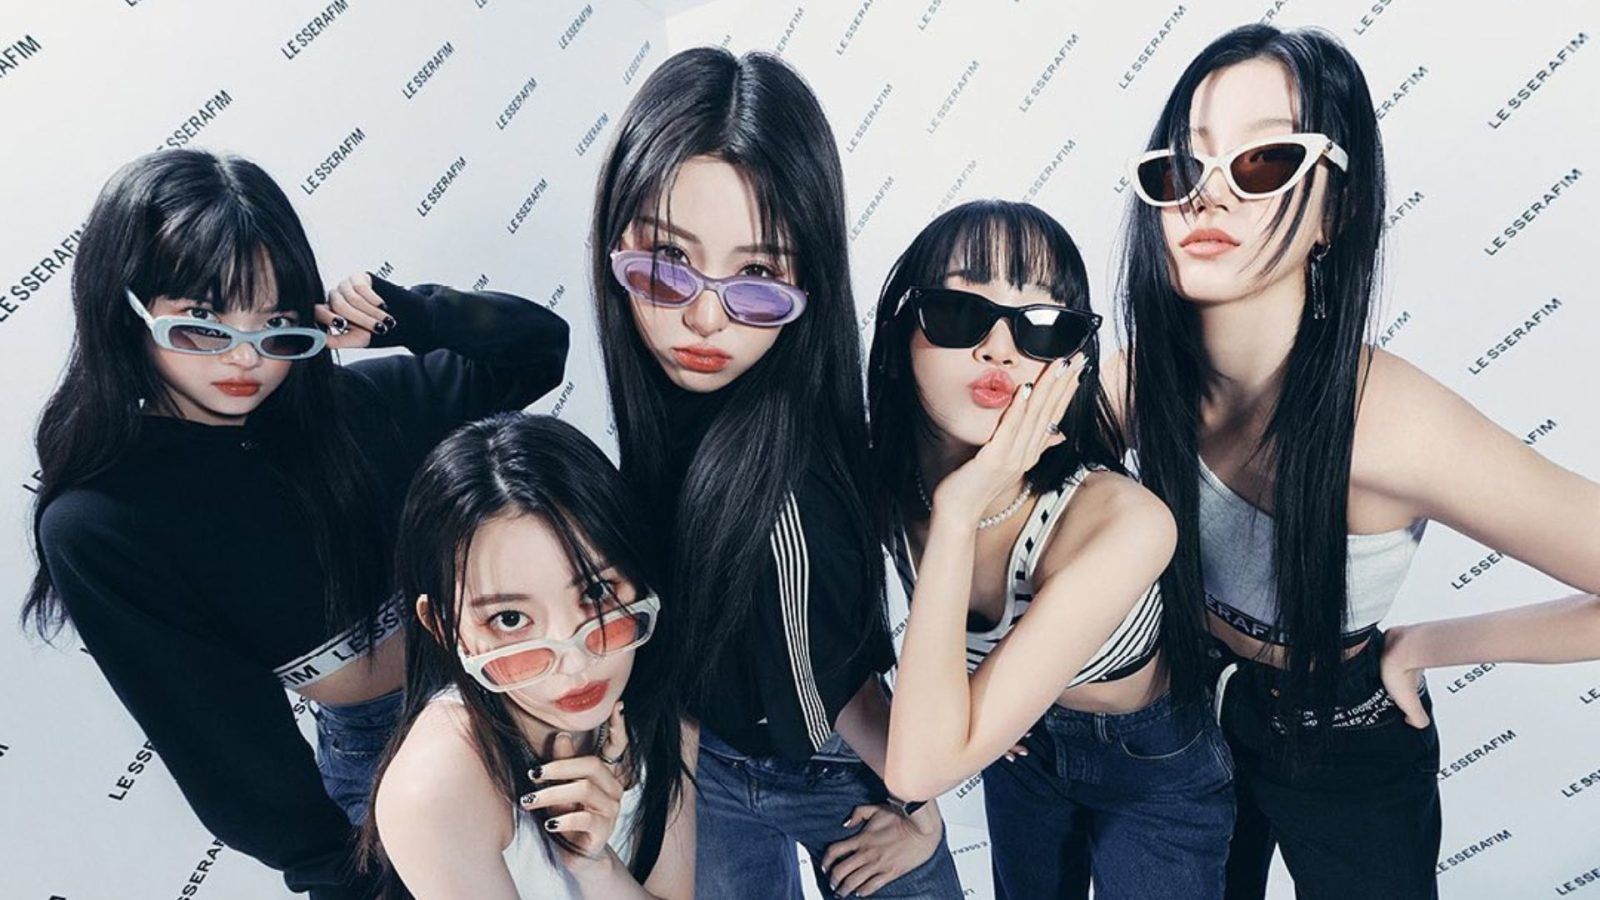 Le Sserafim: Everything you need to know about the K-pop girl group